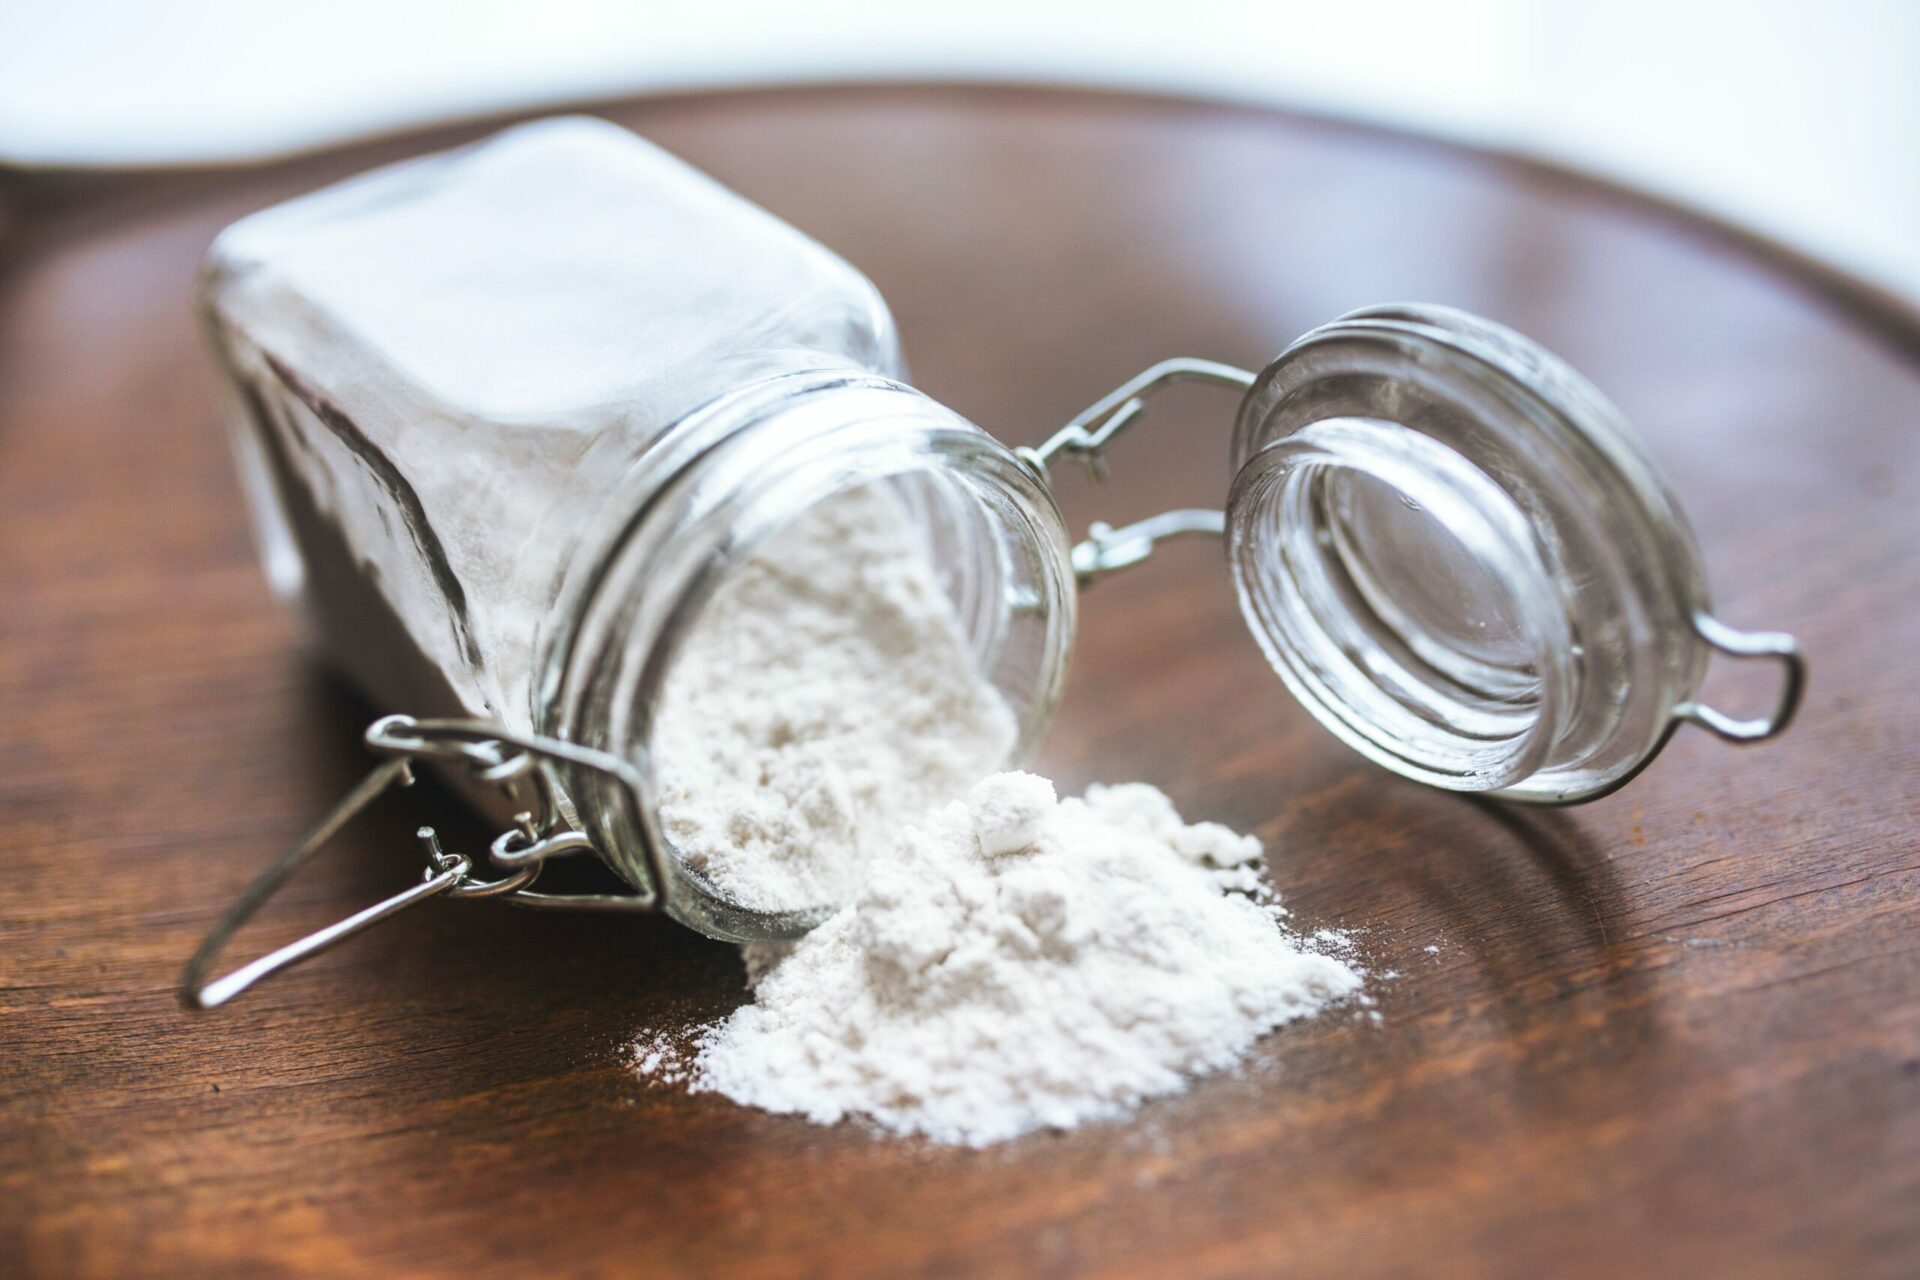 How does bicarbonate of soda differ from baking soda in baking recipes?